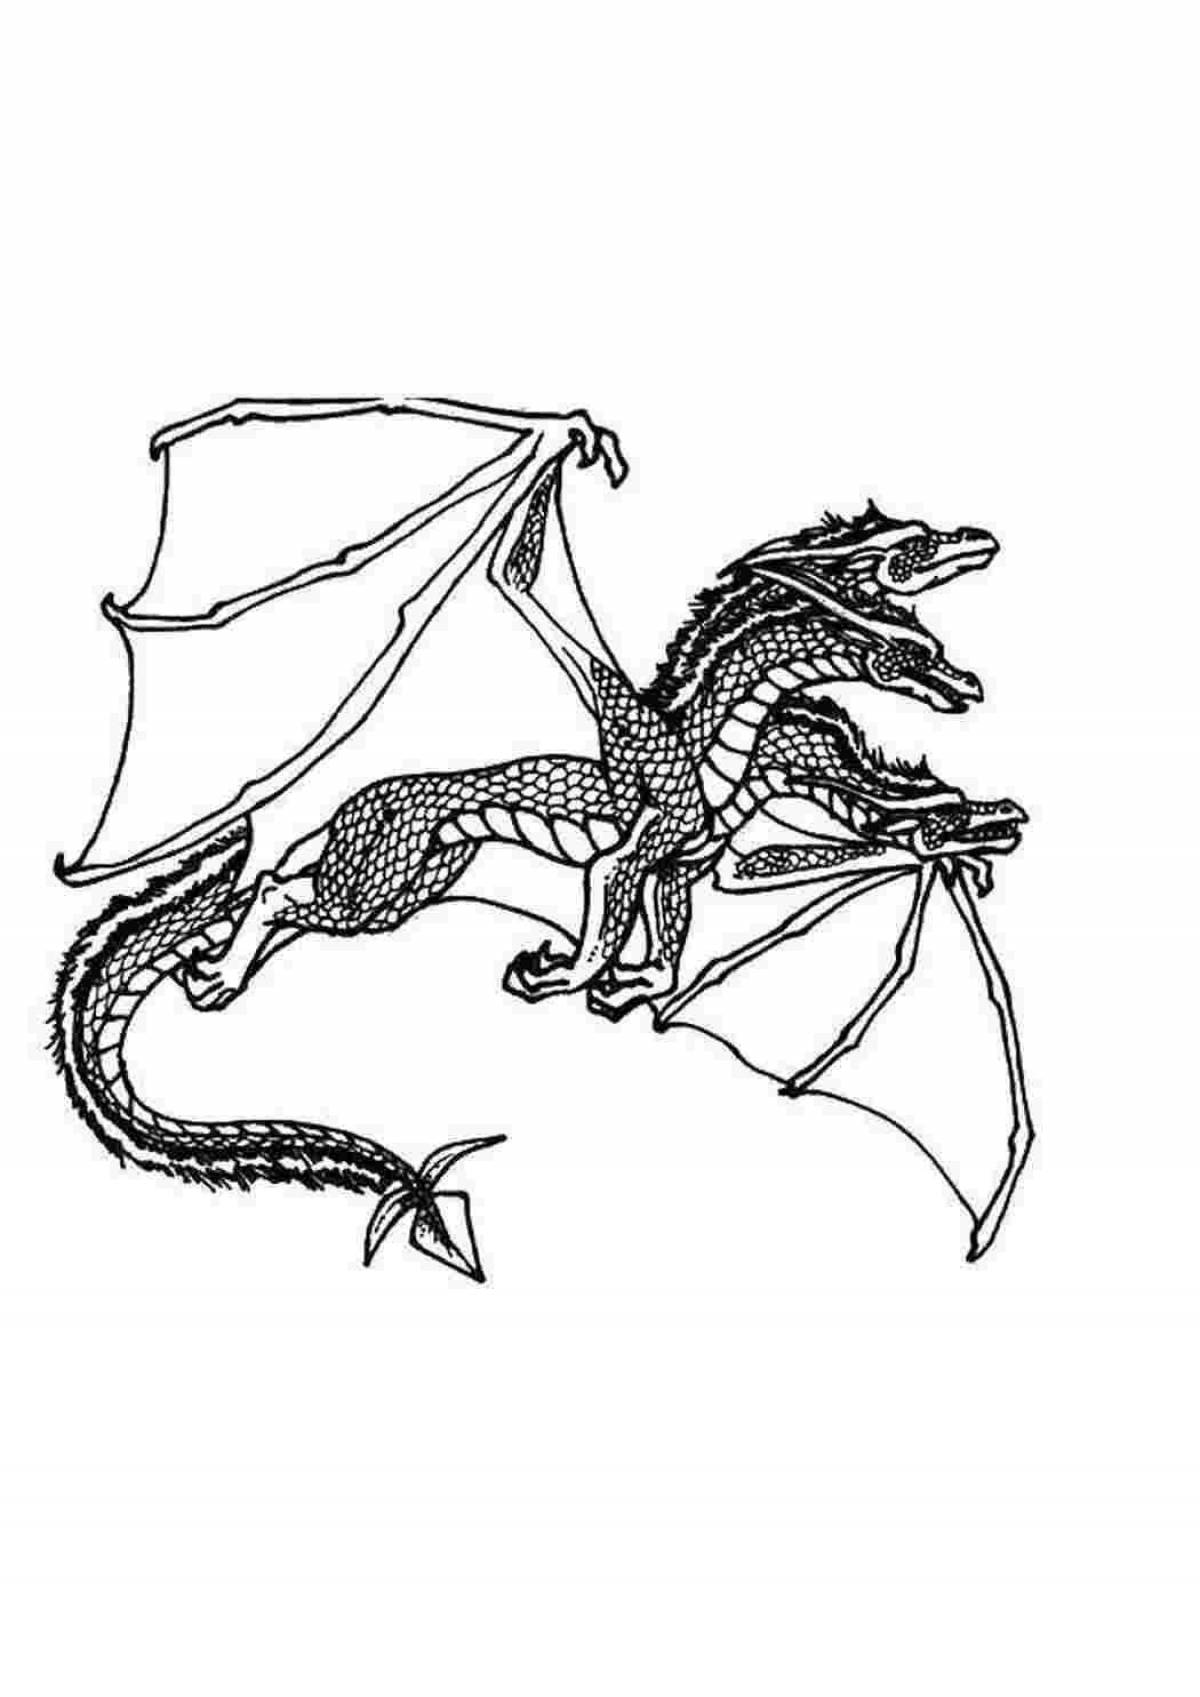 Great three-headed dragon coloring page